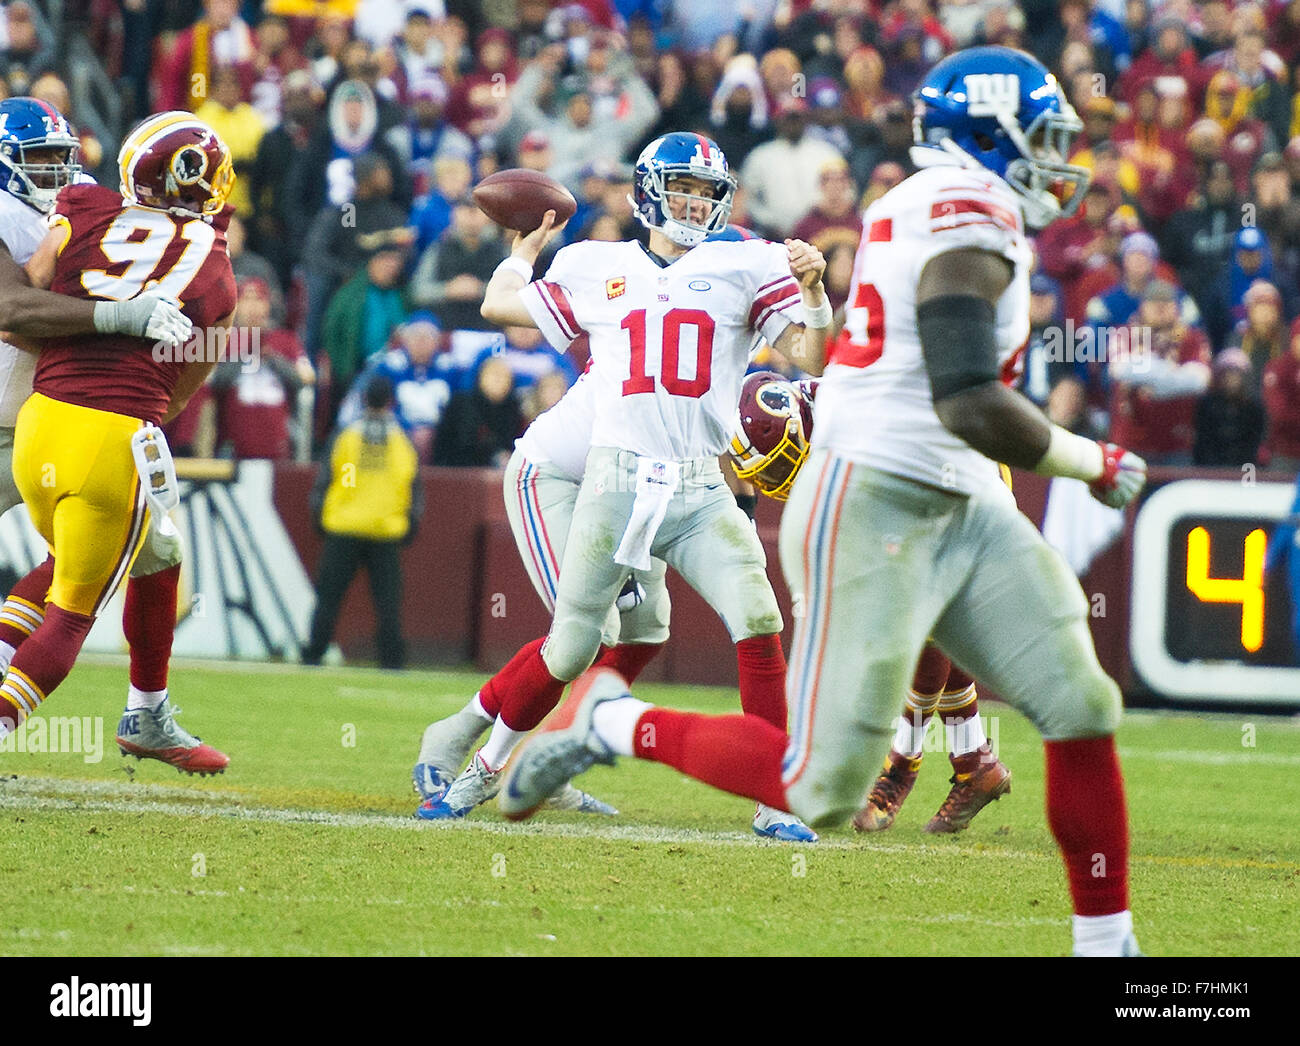 New York Giants quarterback Eli Manning (10) passes to wide receiver Rueben Randle for a touchdown in the fourth quarter against the Washington Redskins at FedEx Field in Landover, Maryland on Sunday, November 29, 2015. The Redskins won the game 20-14. Credit: Ron Sachs / CNP (RESTRICTION: NO New York or New Jersey Newspapers or newspapers within a 75 mile radius of New York City)   - NO WIRE SERVICE - Stock Photo